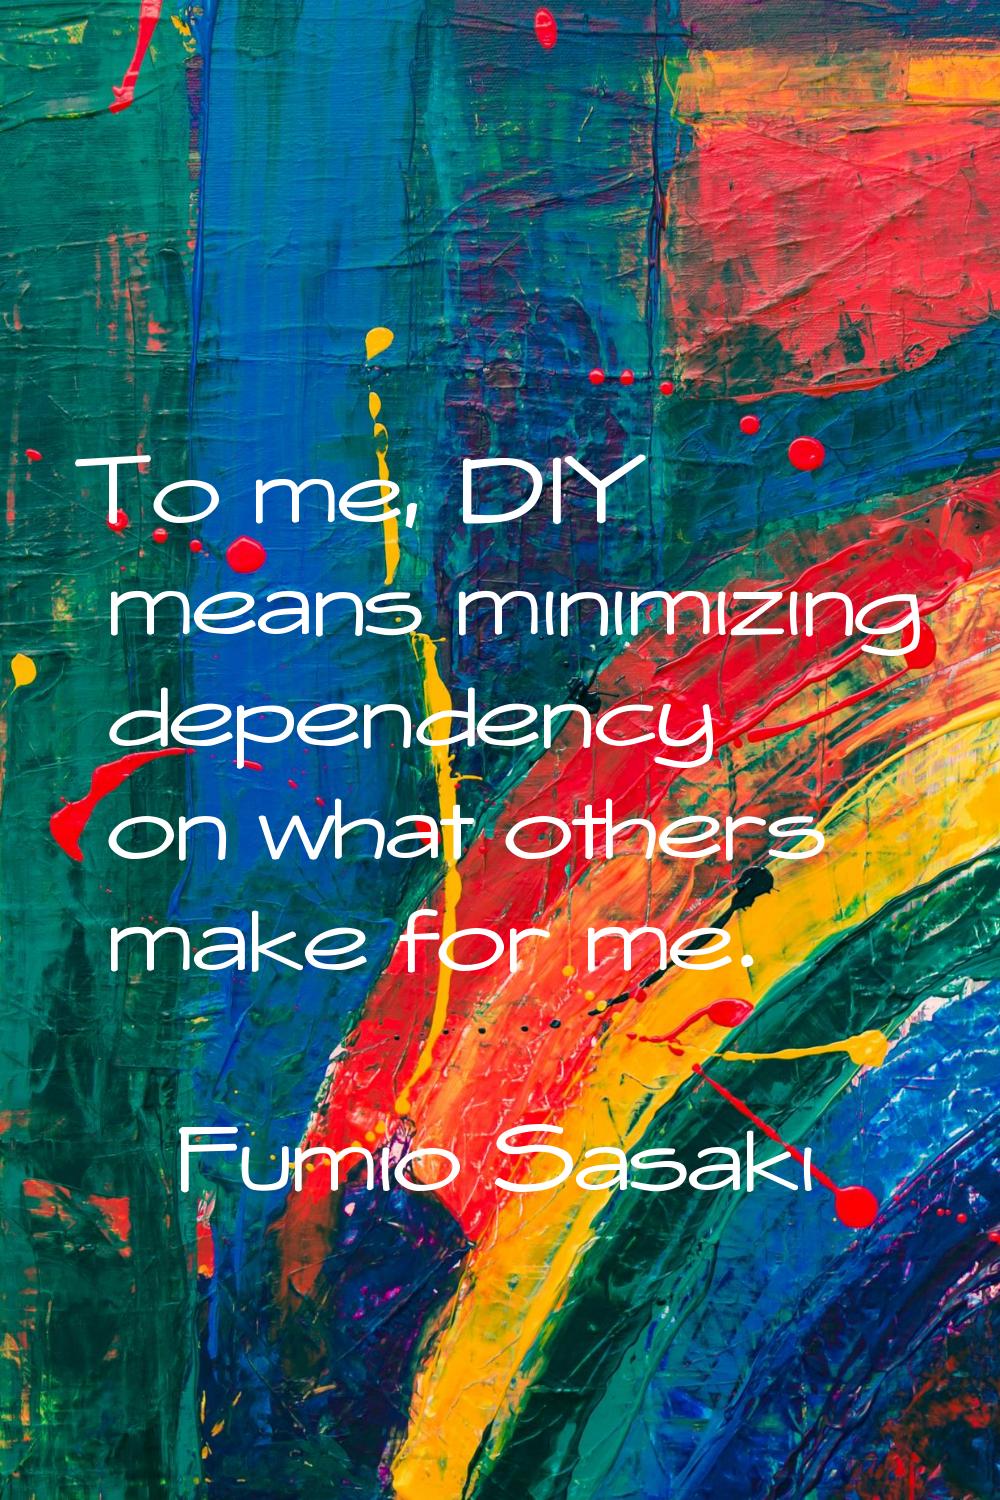 To me, DIY means minimizing dependency on what others make for me.